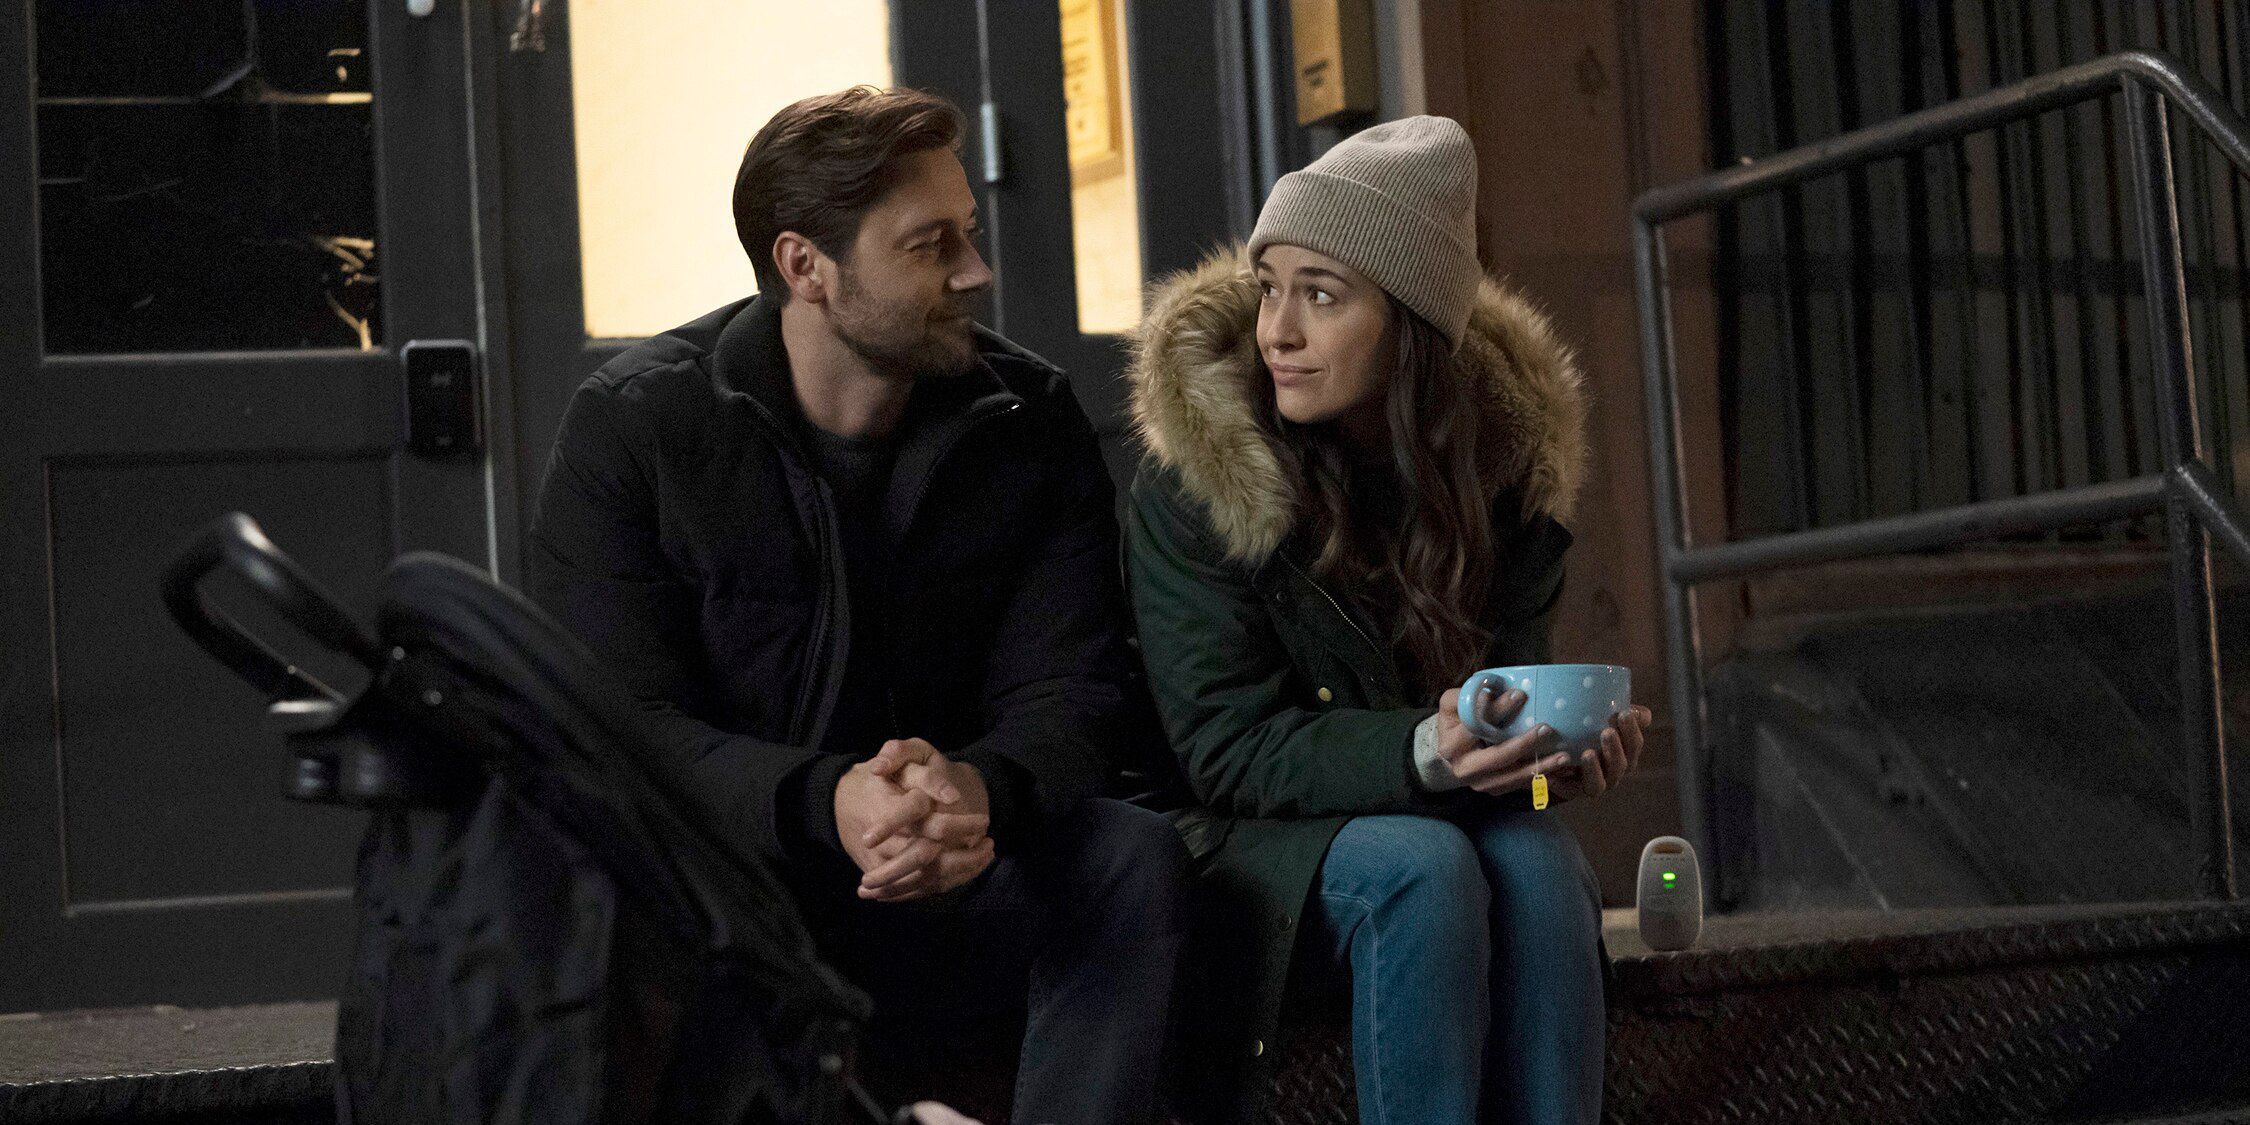 New Amsterdam Couples Ranked From Worst To Best